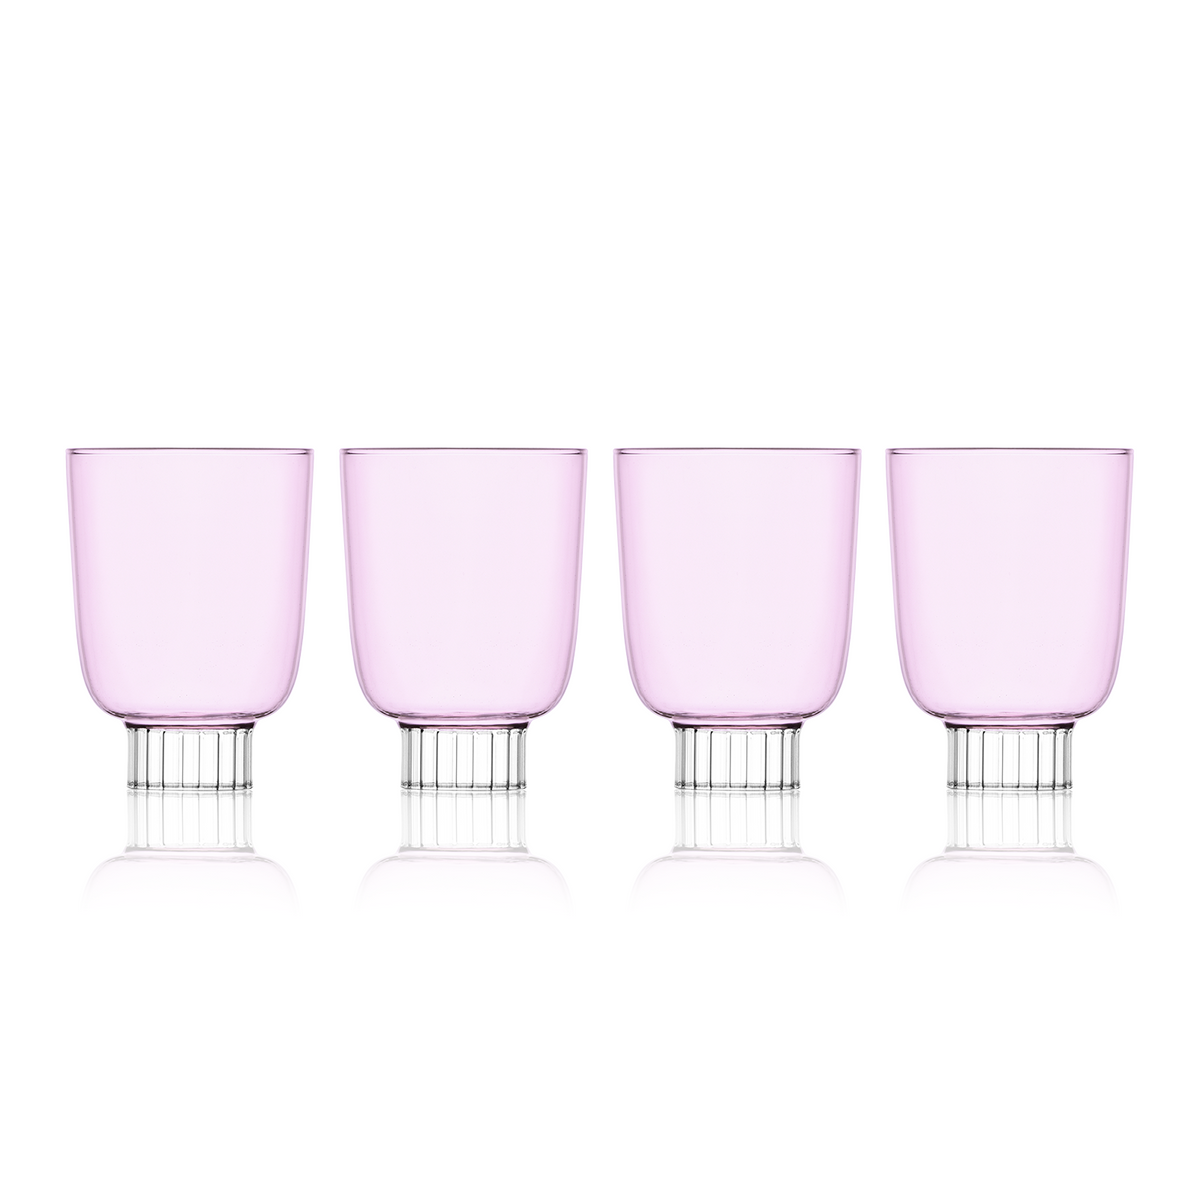 Set-of-four blush pink colored wine glasses. Sprezz colored stemware - Set of 4 Pink